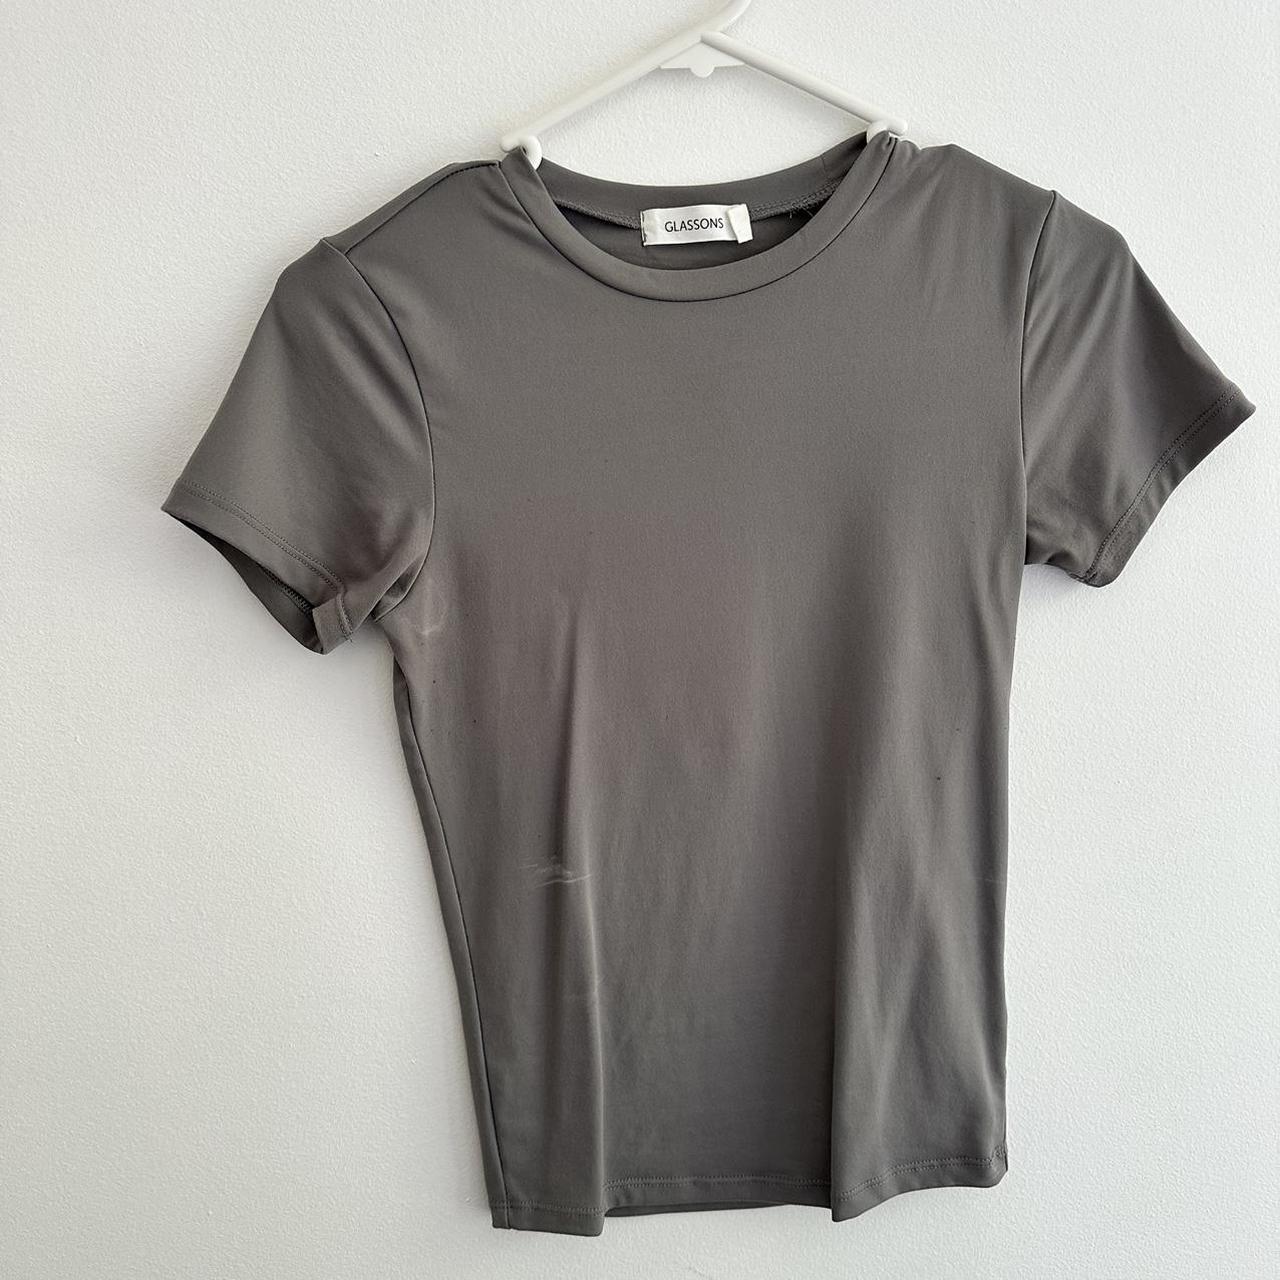 glassons ‘skims’ like grey top! in amazing condition... - Depop